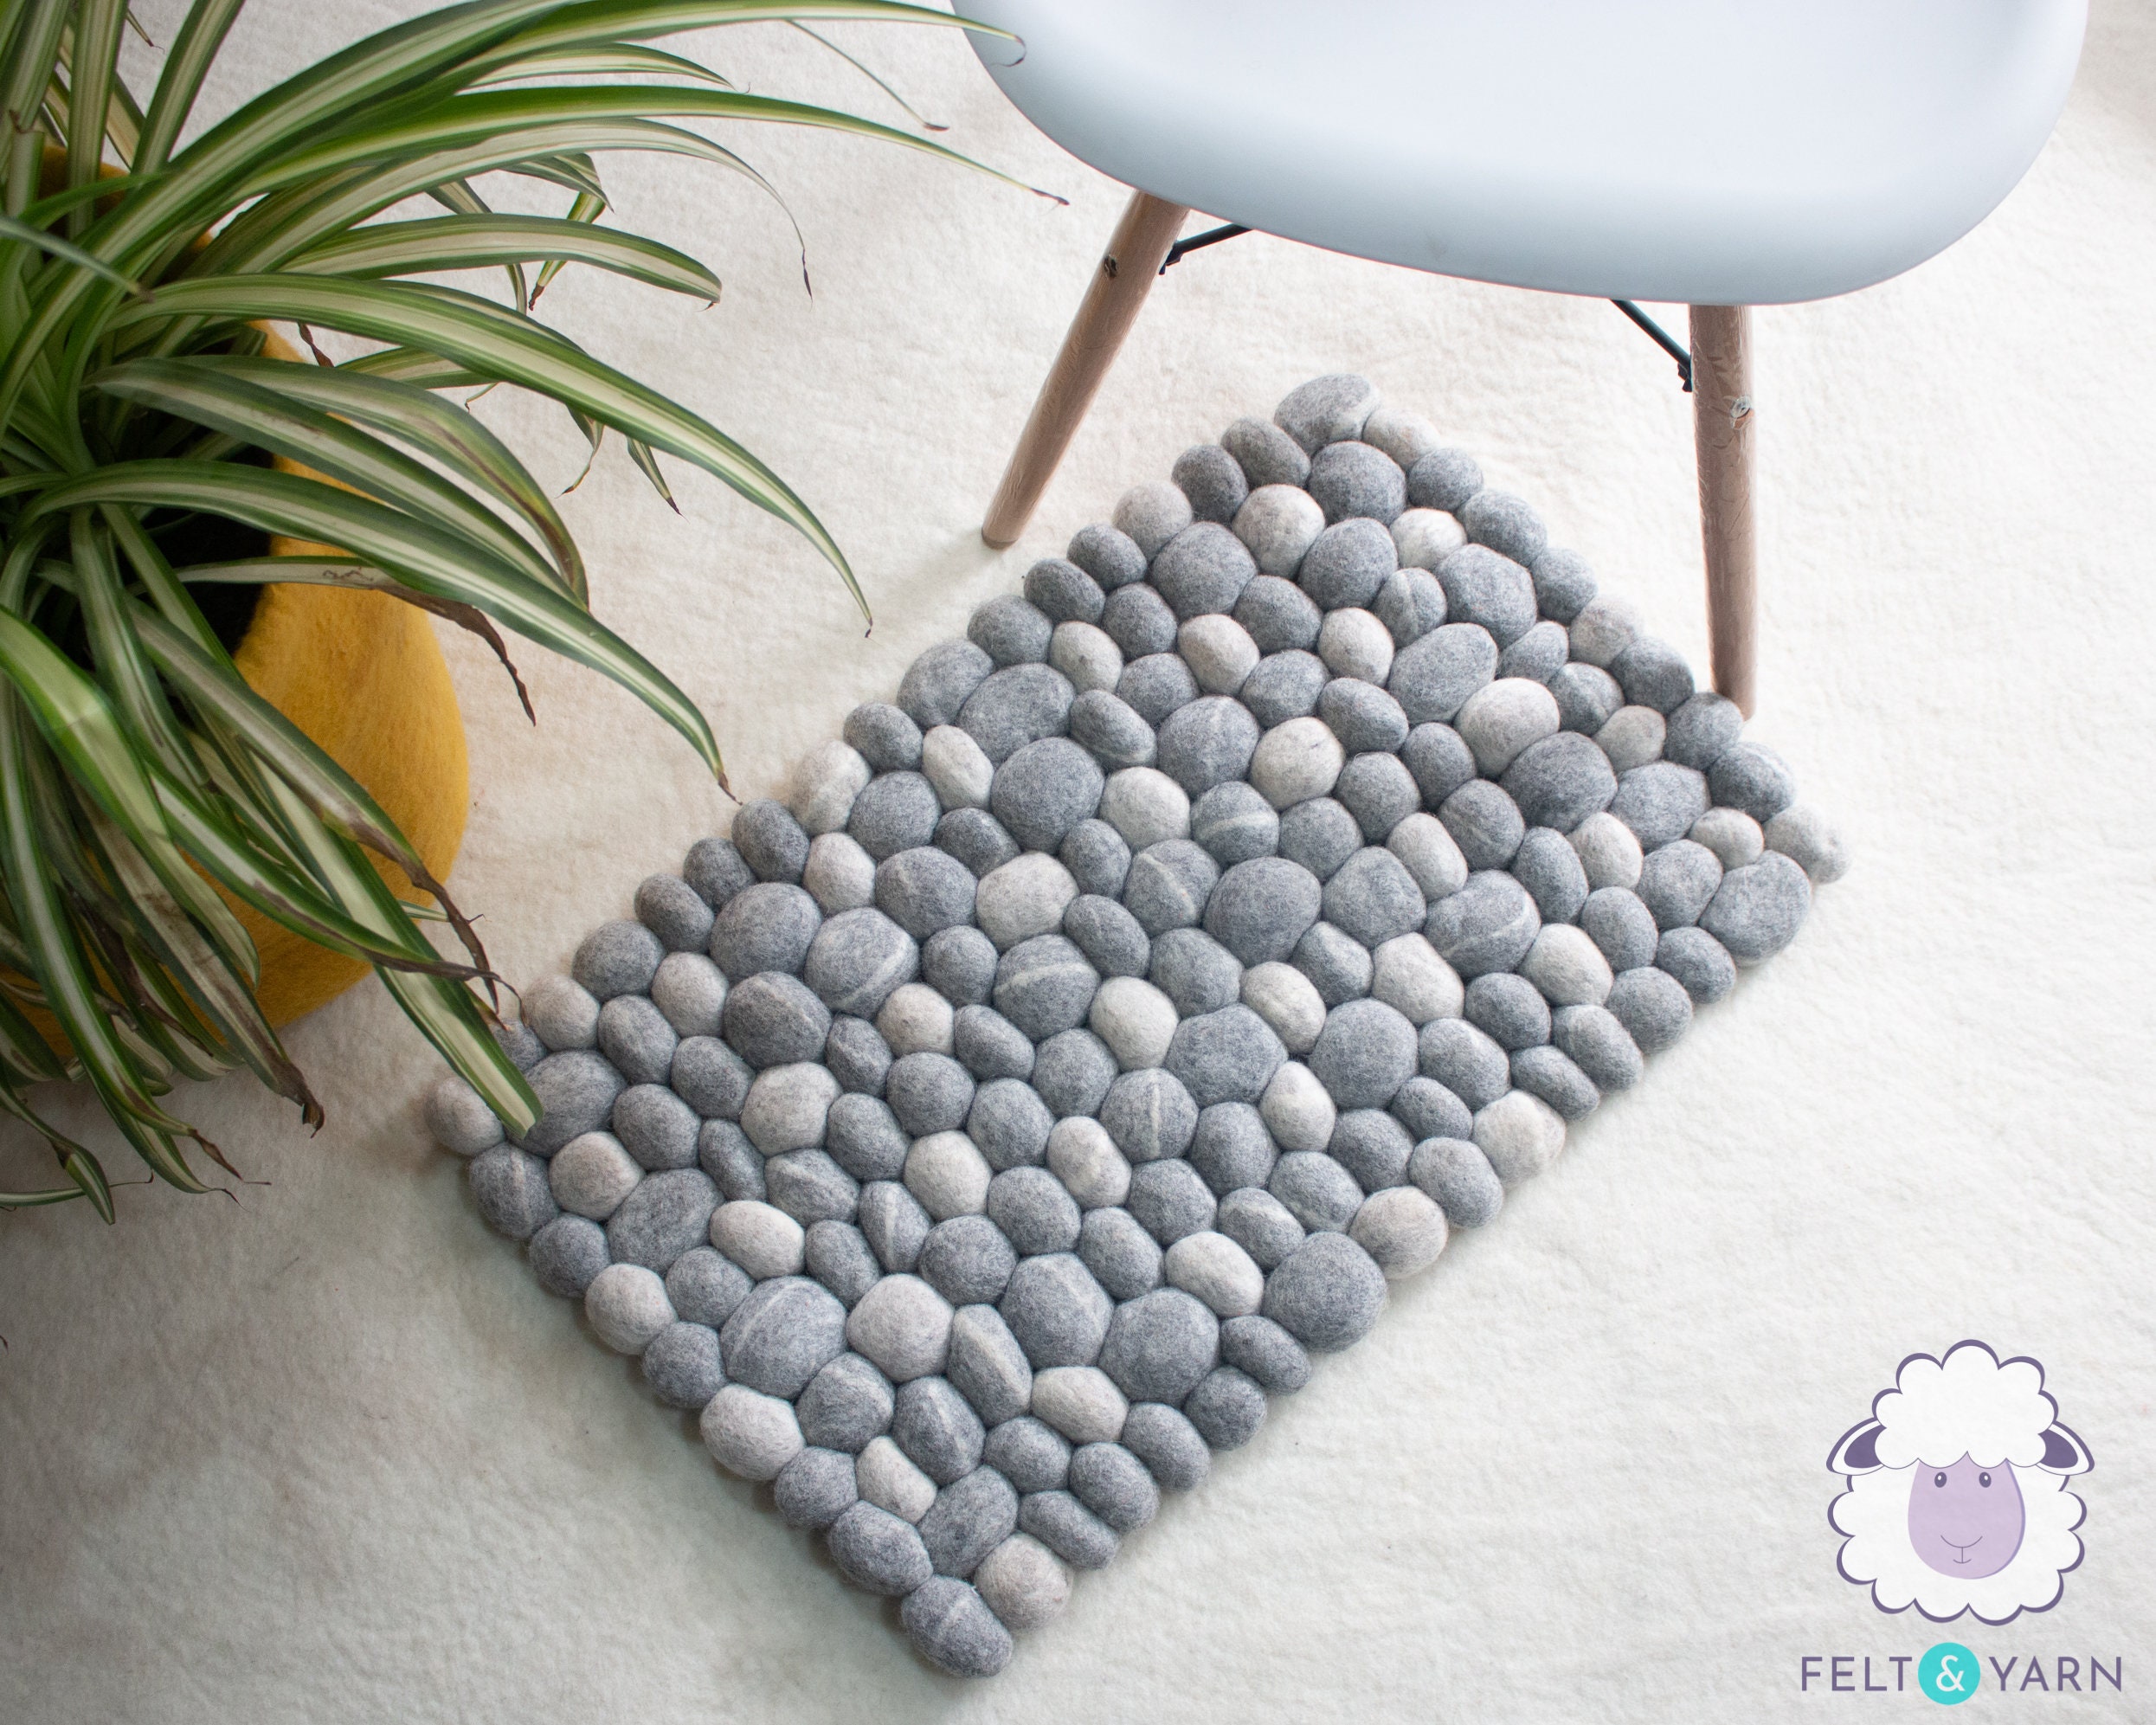 Wool Felted Pebble Rug With Natural Color Handmade Felt Stones - Good For Living Room & Bathroom Decor, Starts 40x60cm Size - Fair Trade